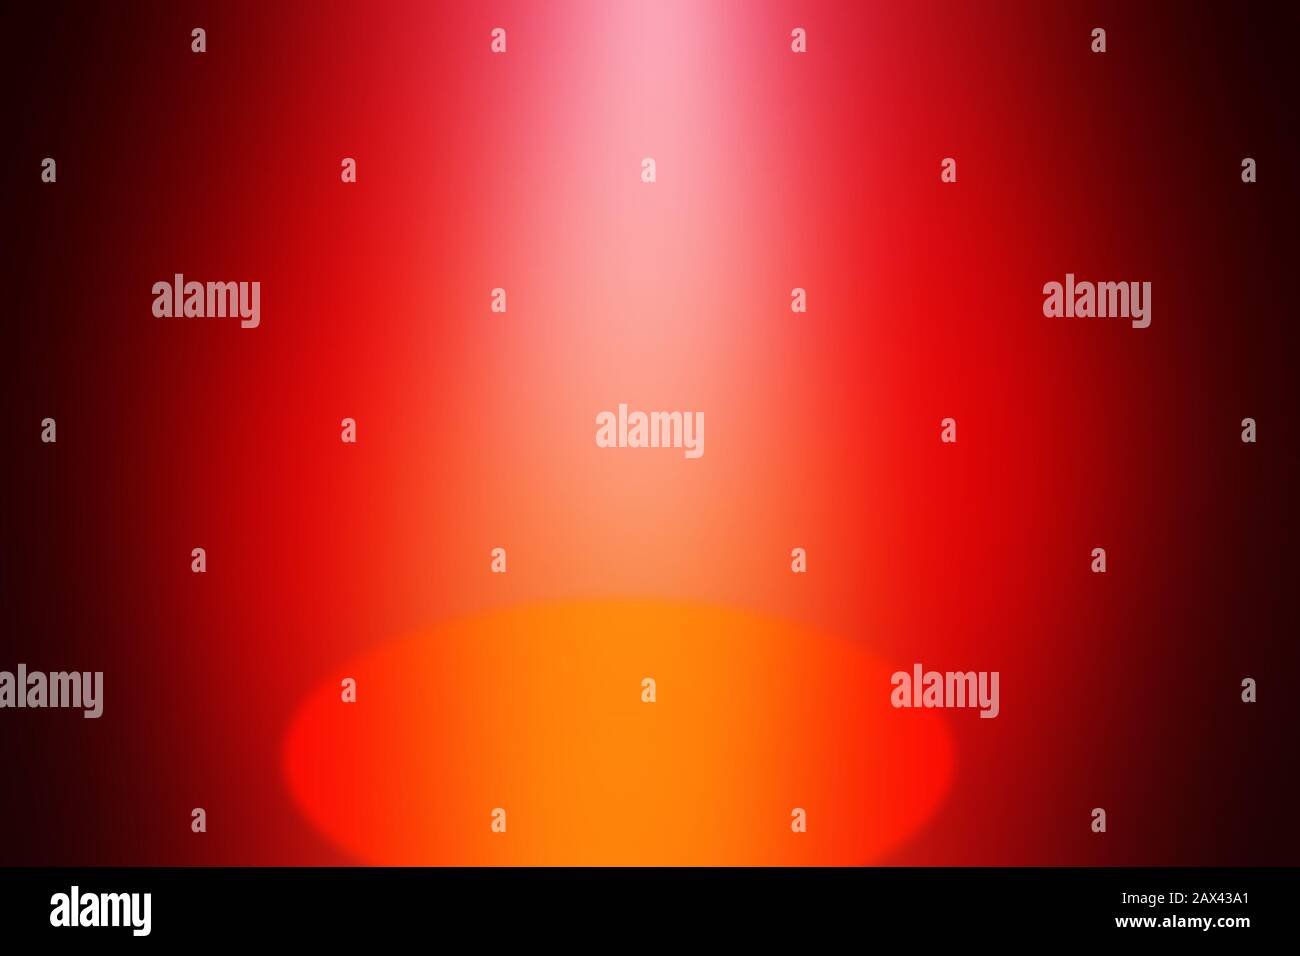 An abstract warm tone vignette background image. Stock Photo